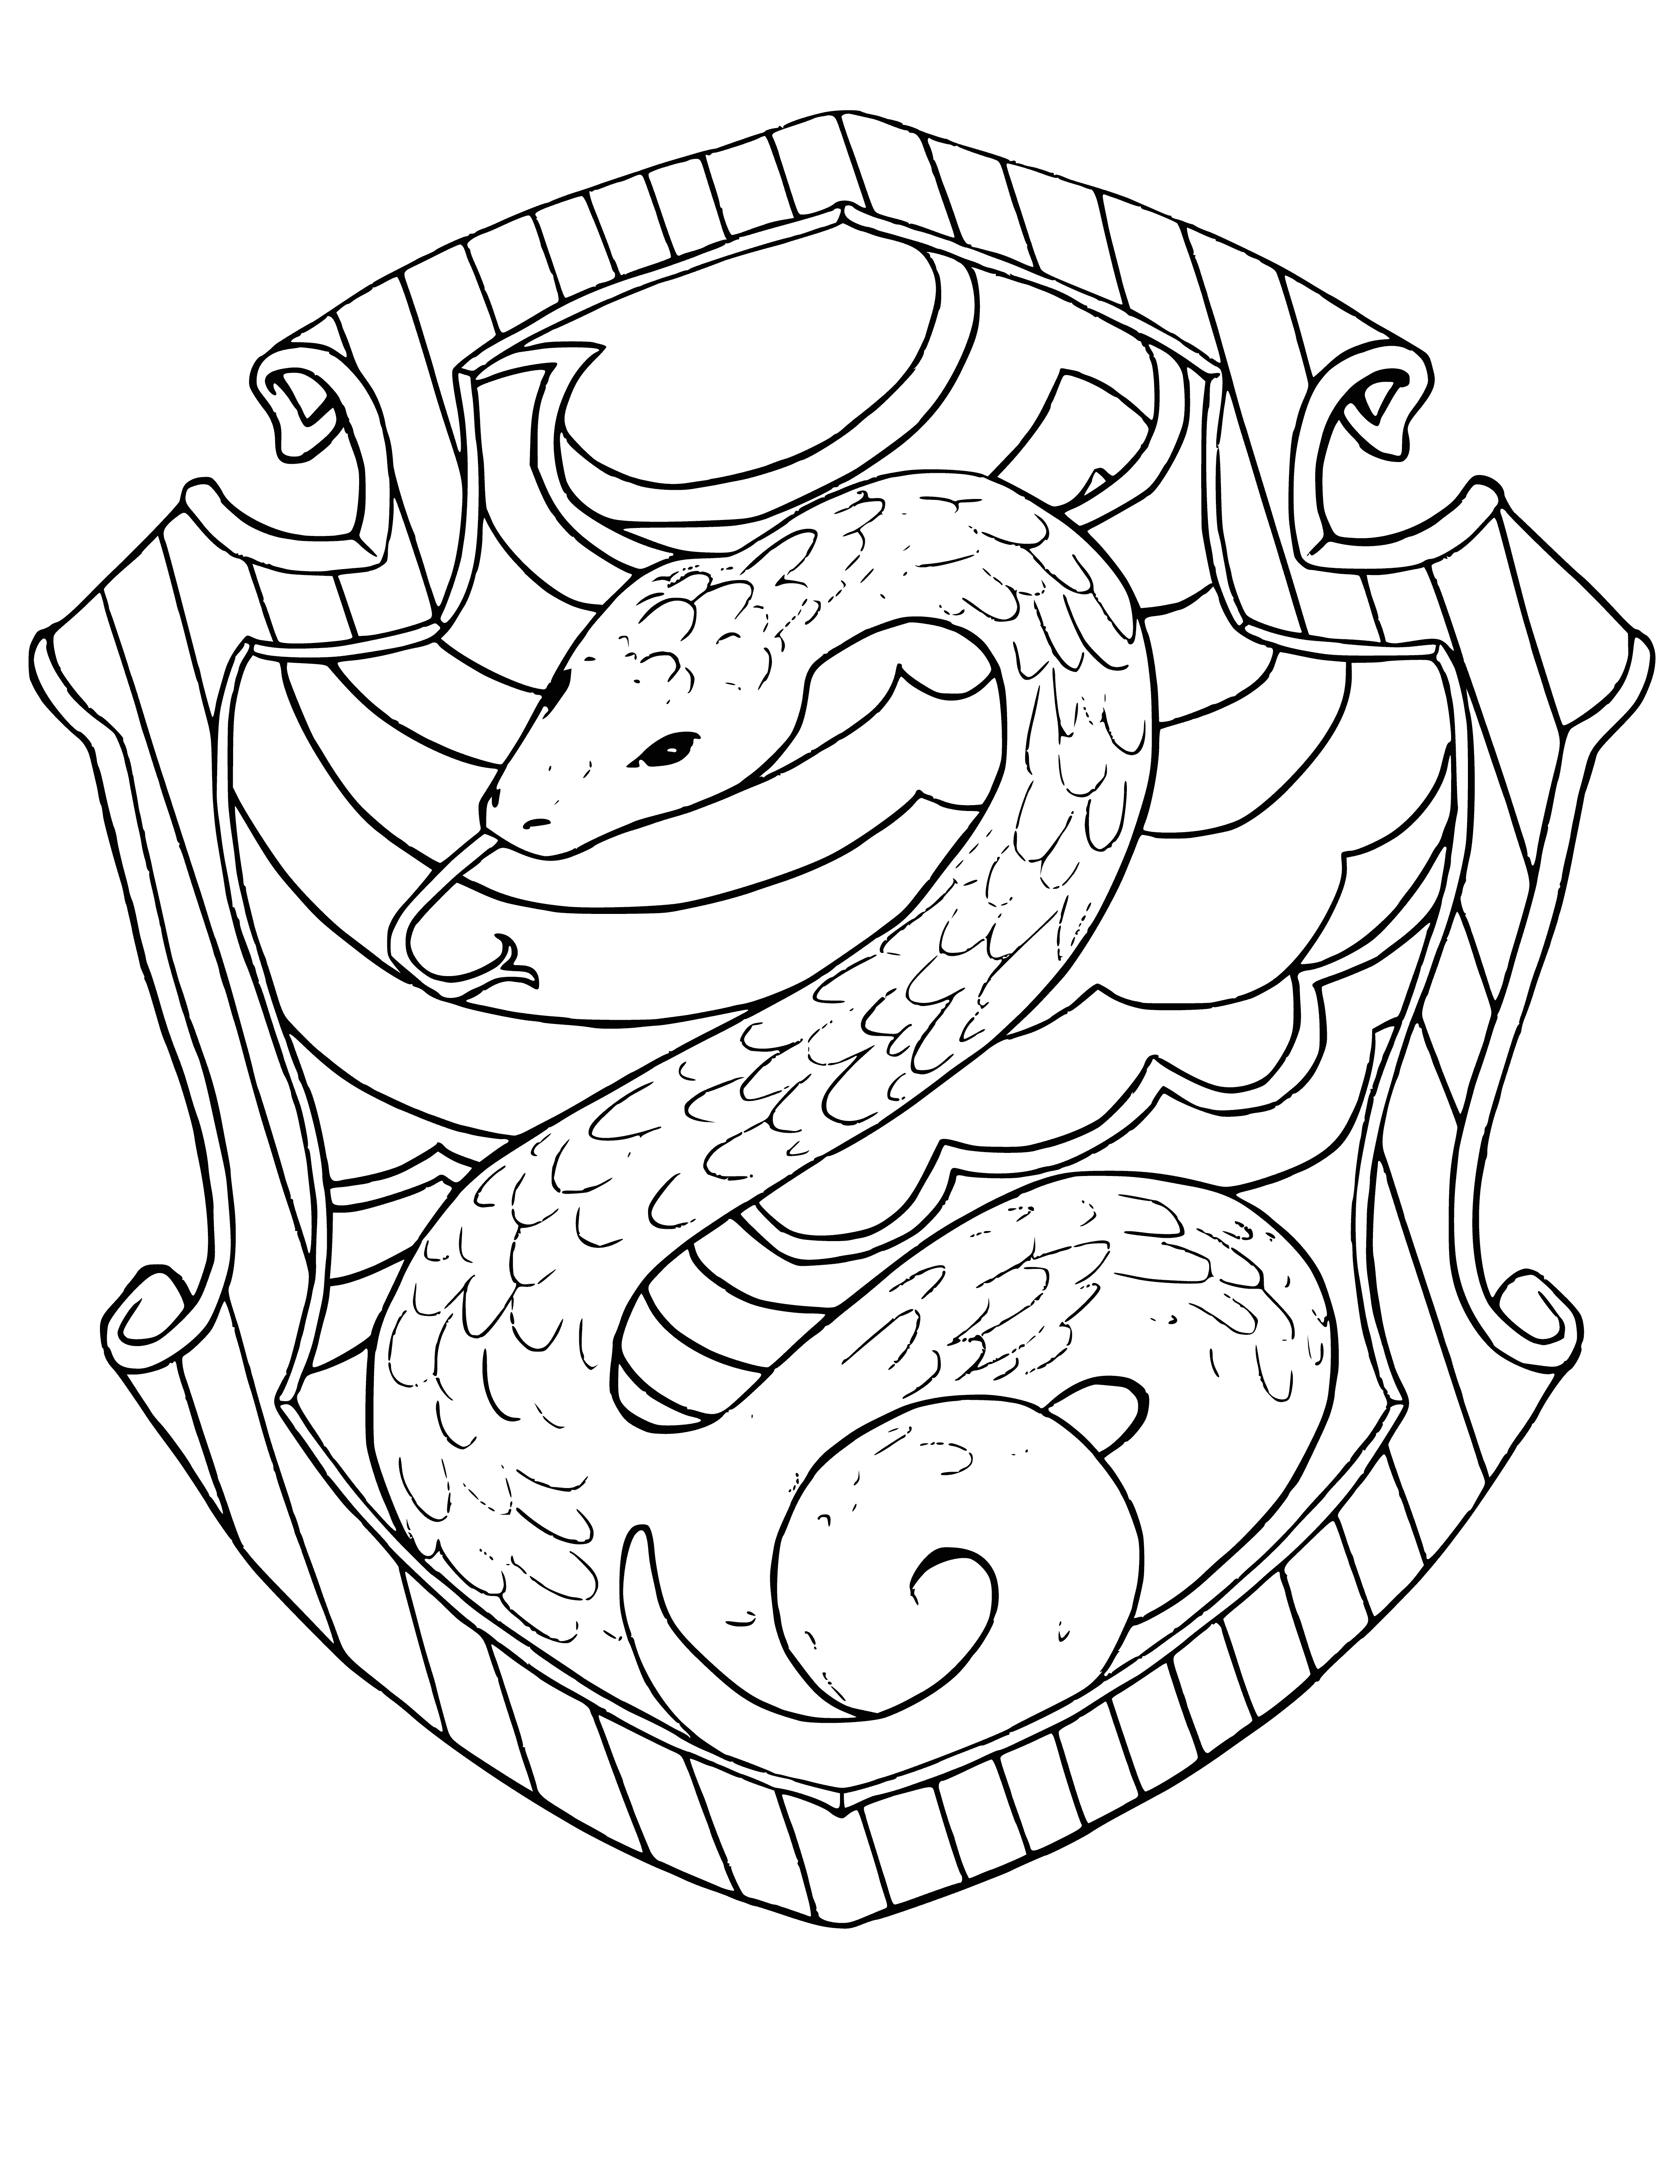 coloring page: Green snake on silver background shows sharp teeth, symbolizing power and protection.